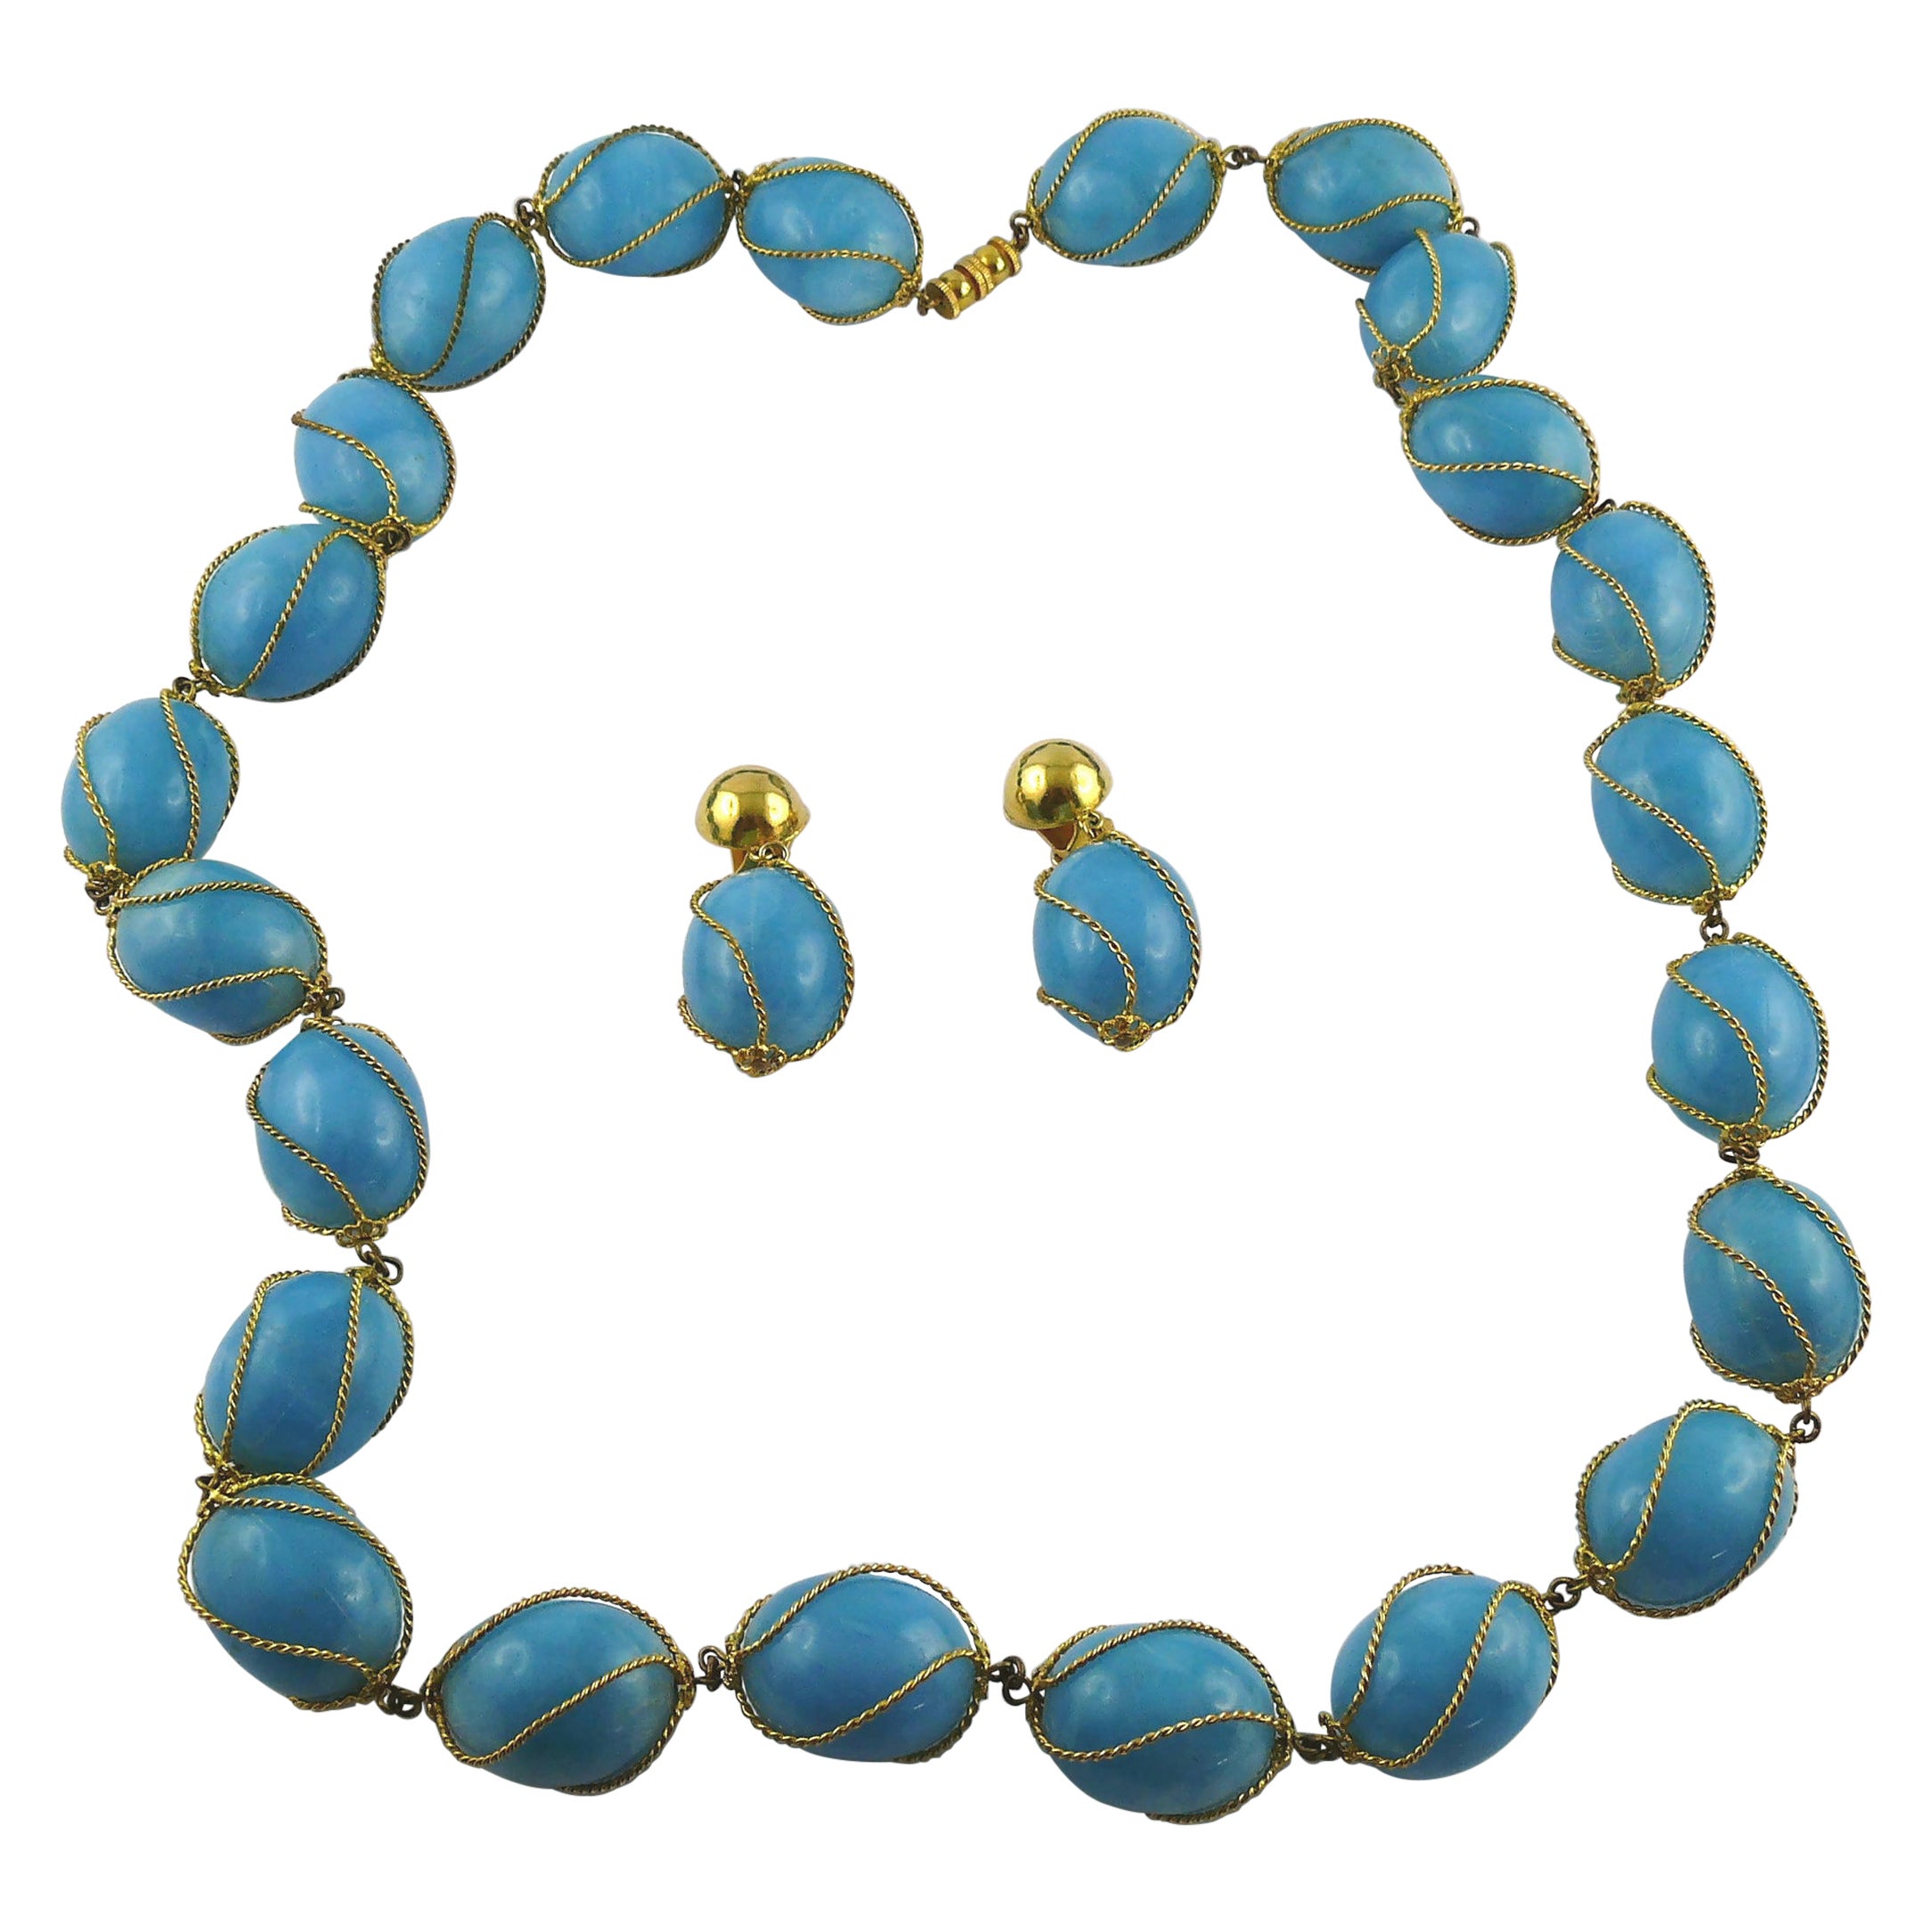 Christian Dior Vintage Encaged Blue Resin Beads Necklace and Earrings Set 1966